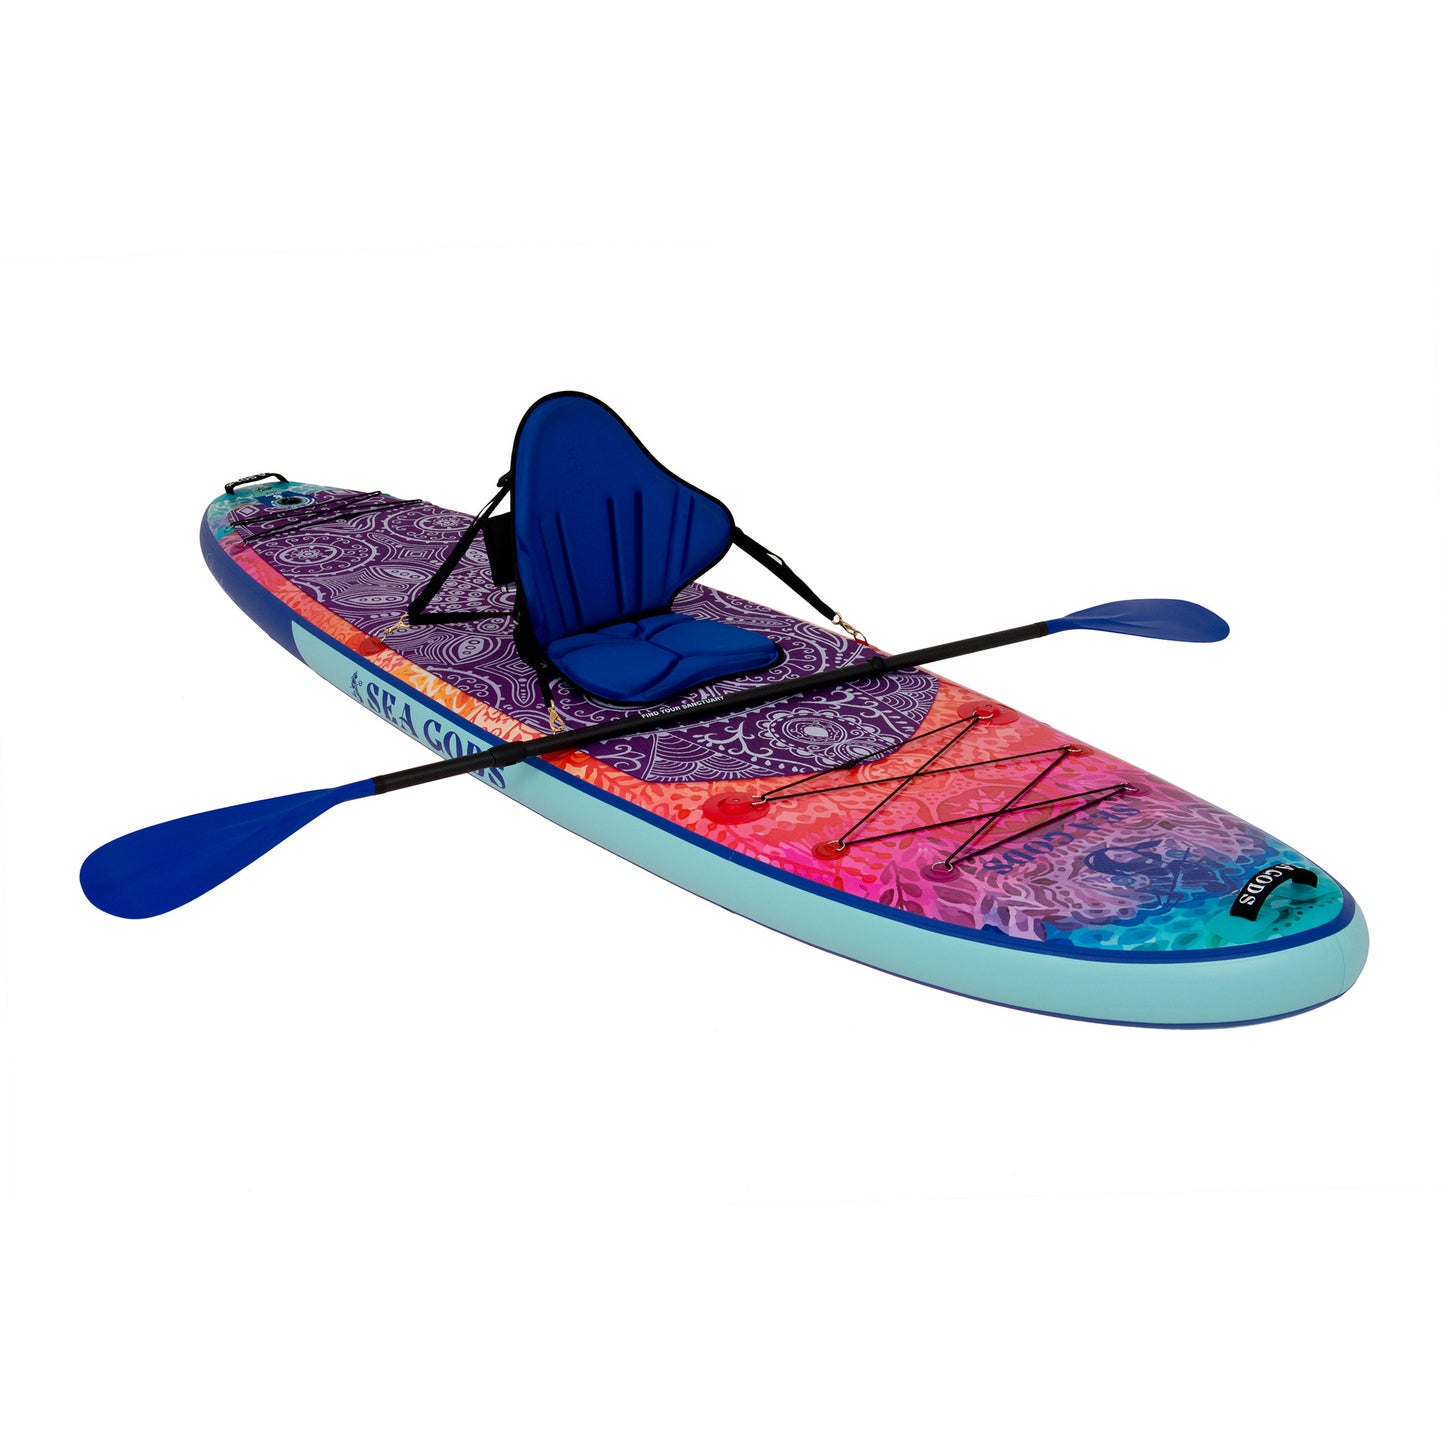 SUP Board with kayak seat